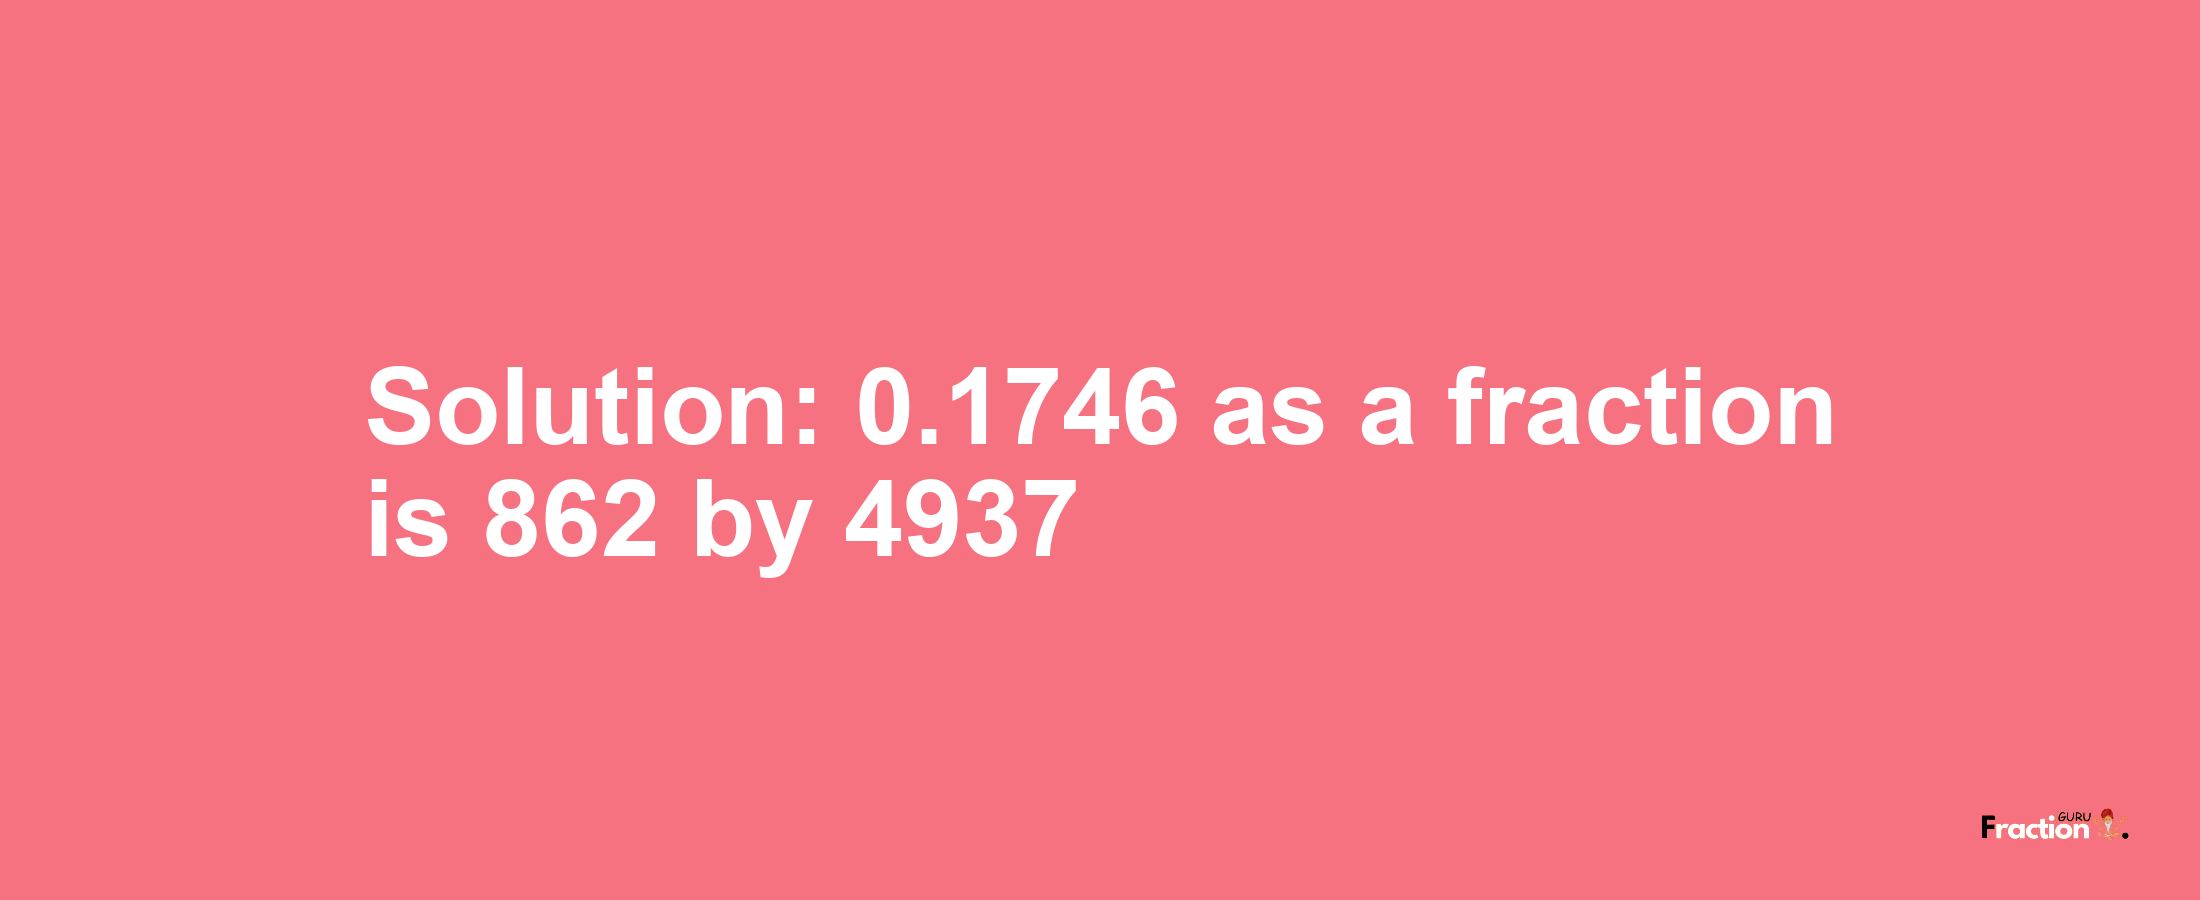 Solution:0.1746 as a fraction is 862/4937